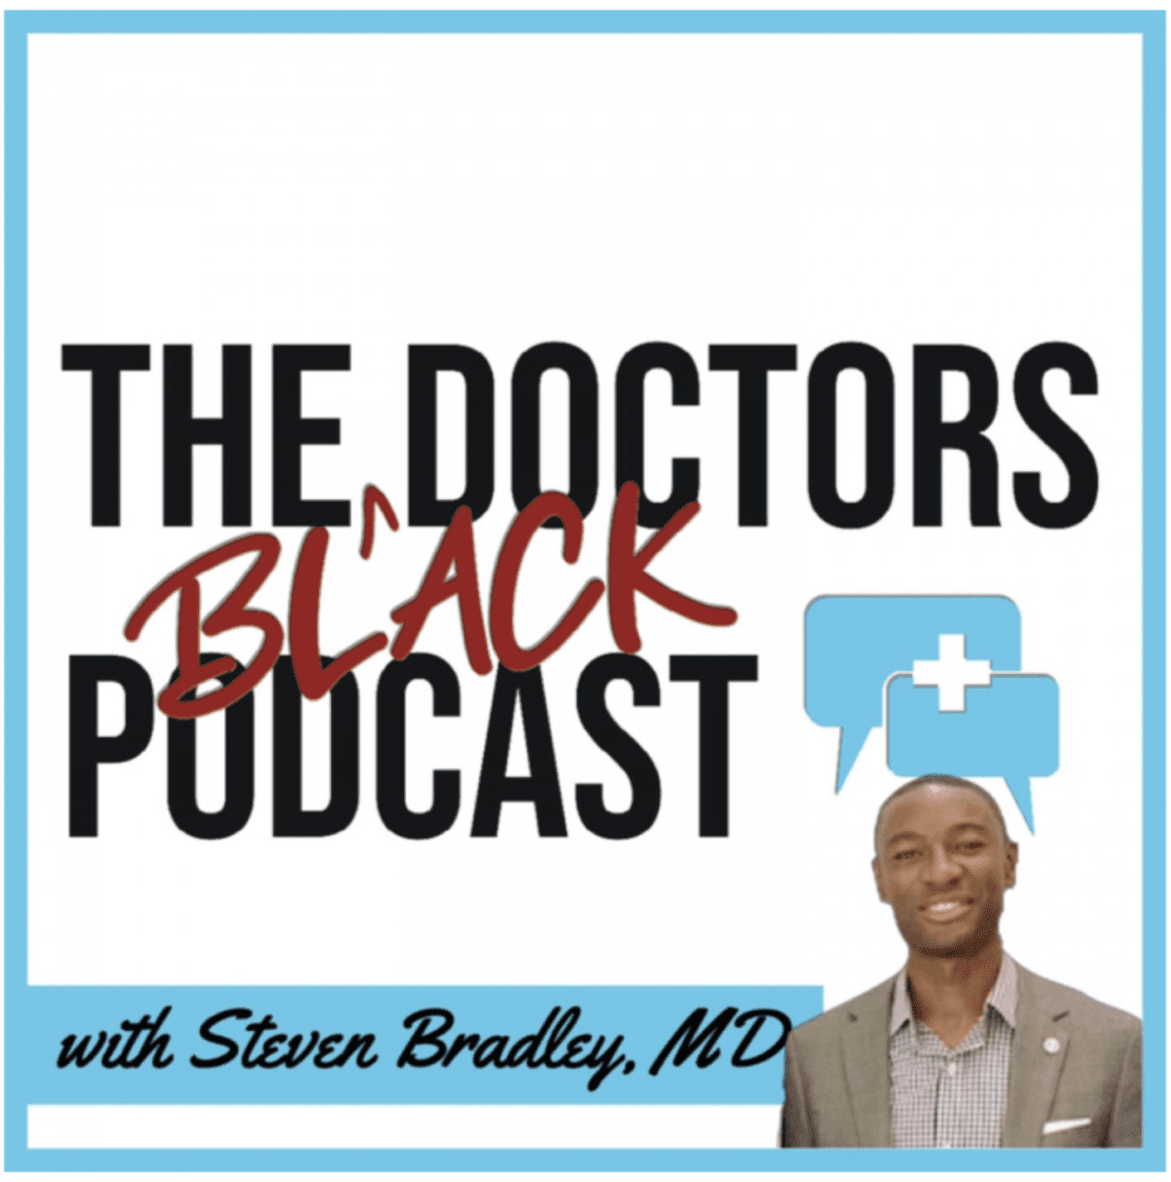 Black Podcasting - MedEx Academy Program Allows Students to Explore Careers in Healthcare